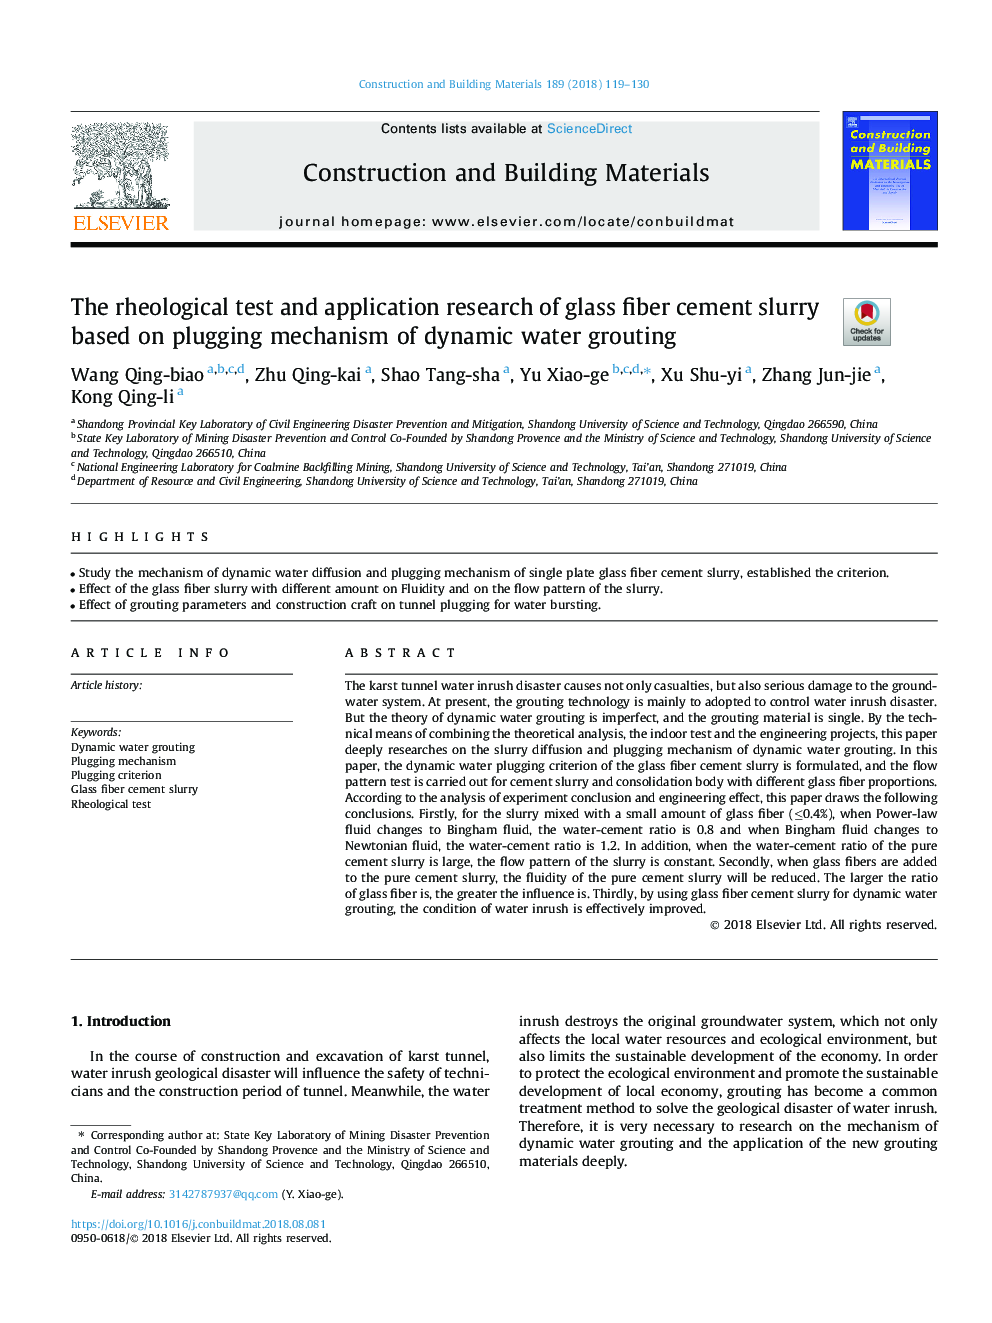 The rheological test and application research of glass fiber cement slurry based on plugging mechanism of dynamic water grouting